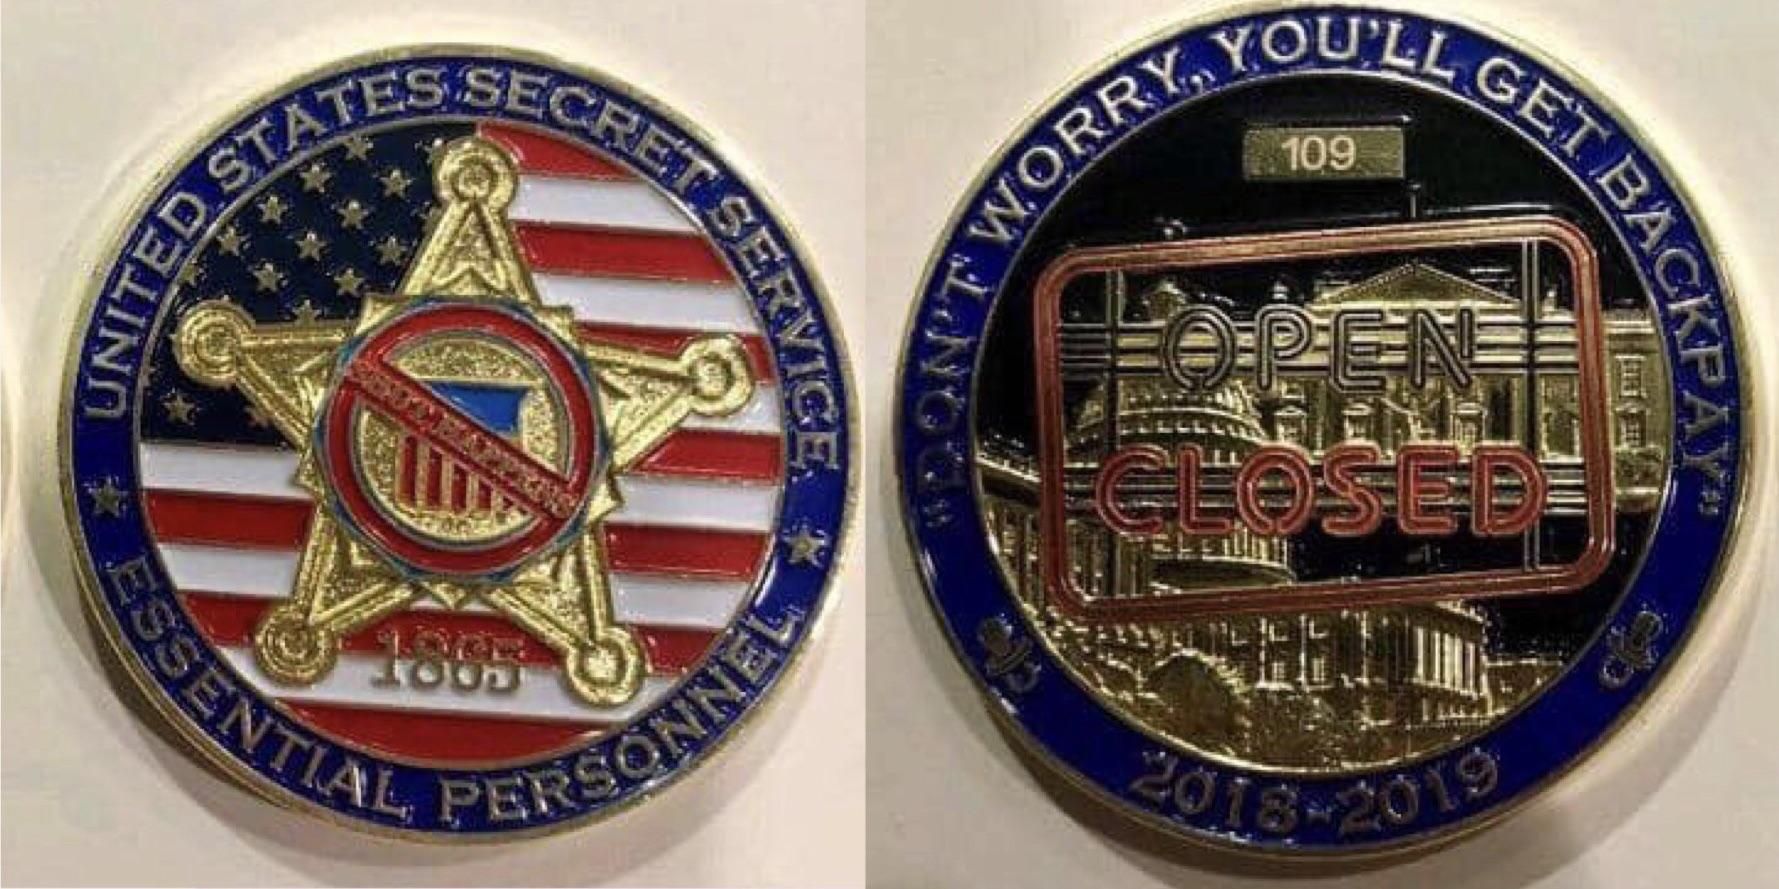 Secret Service members create challenge coin for working without pay.